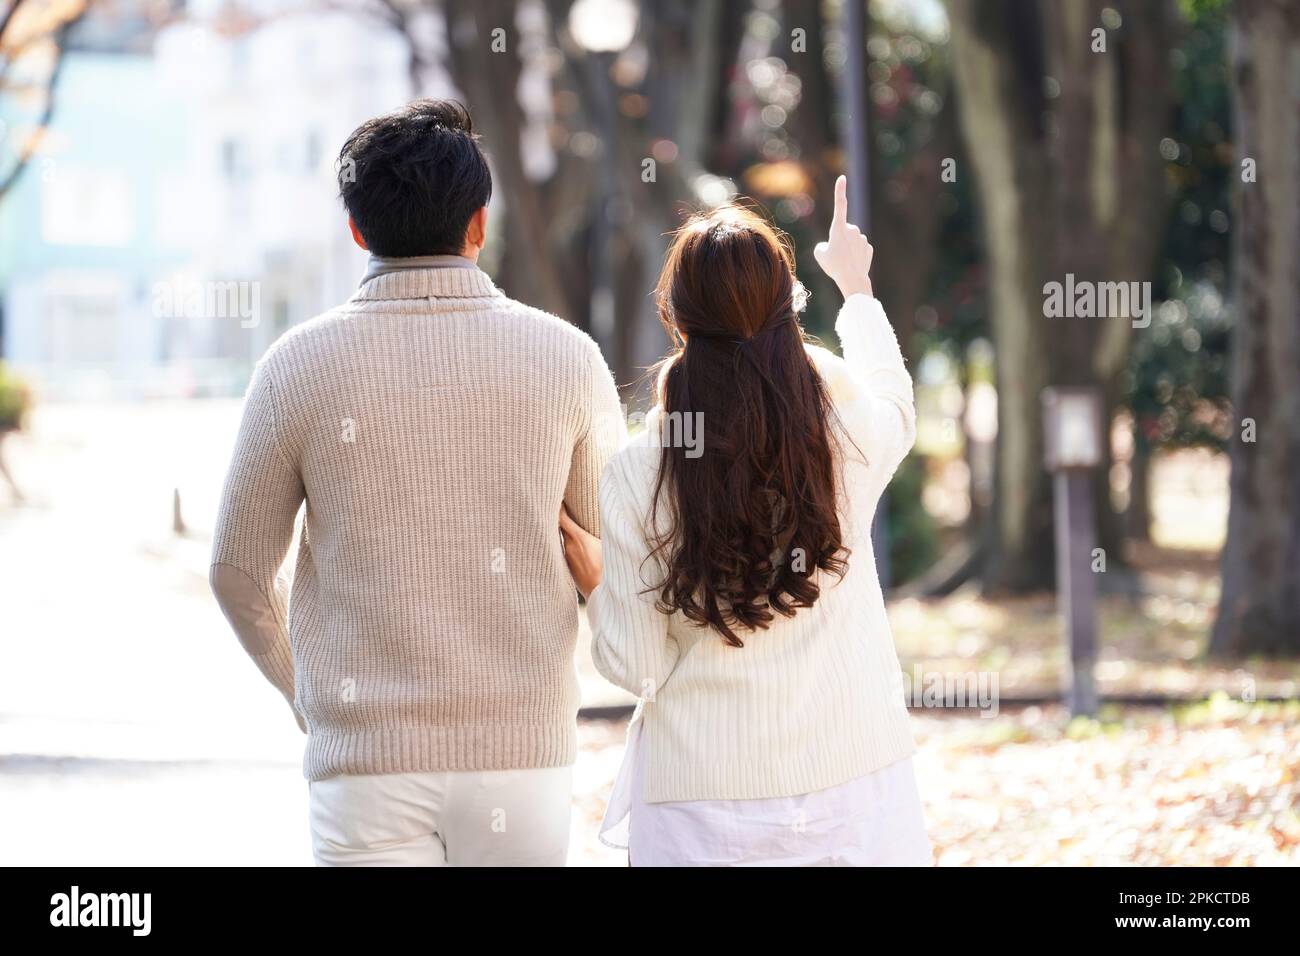 Rear view of a couple in their 20s strolling along a tree-lined avenue in winter Stock Photo